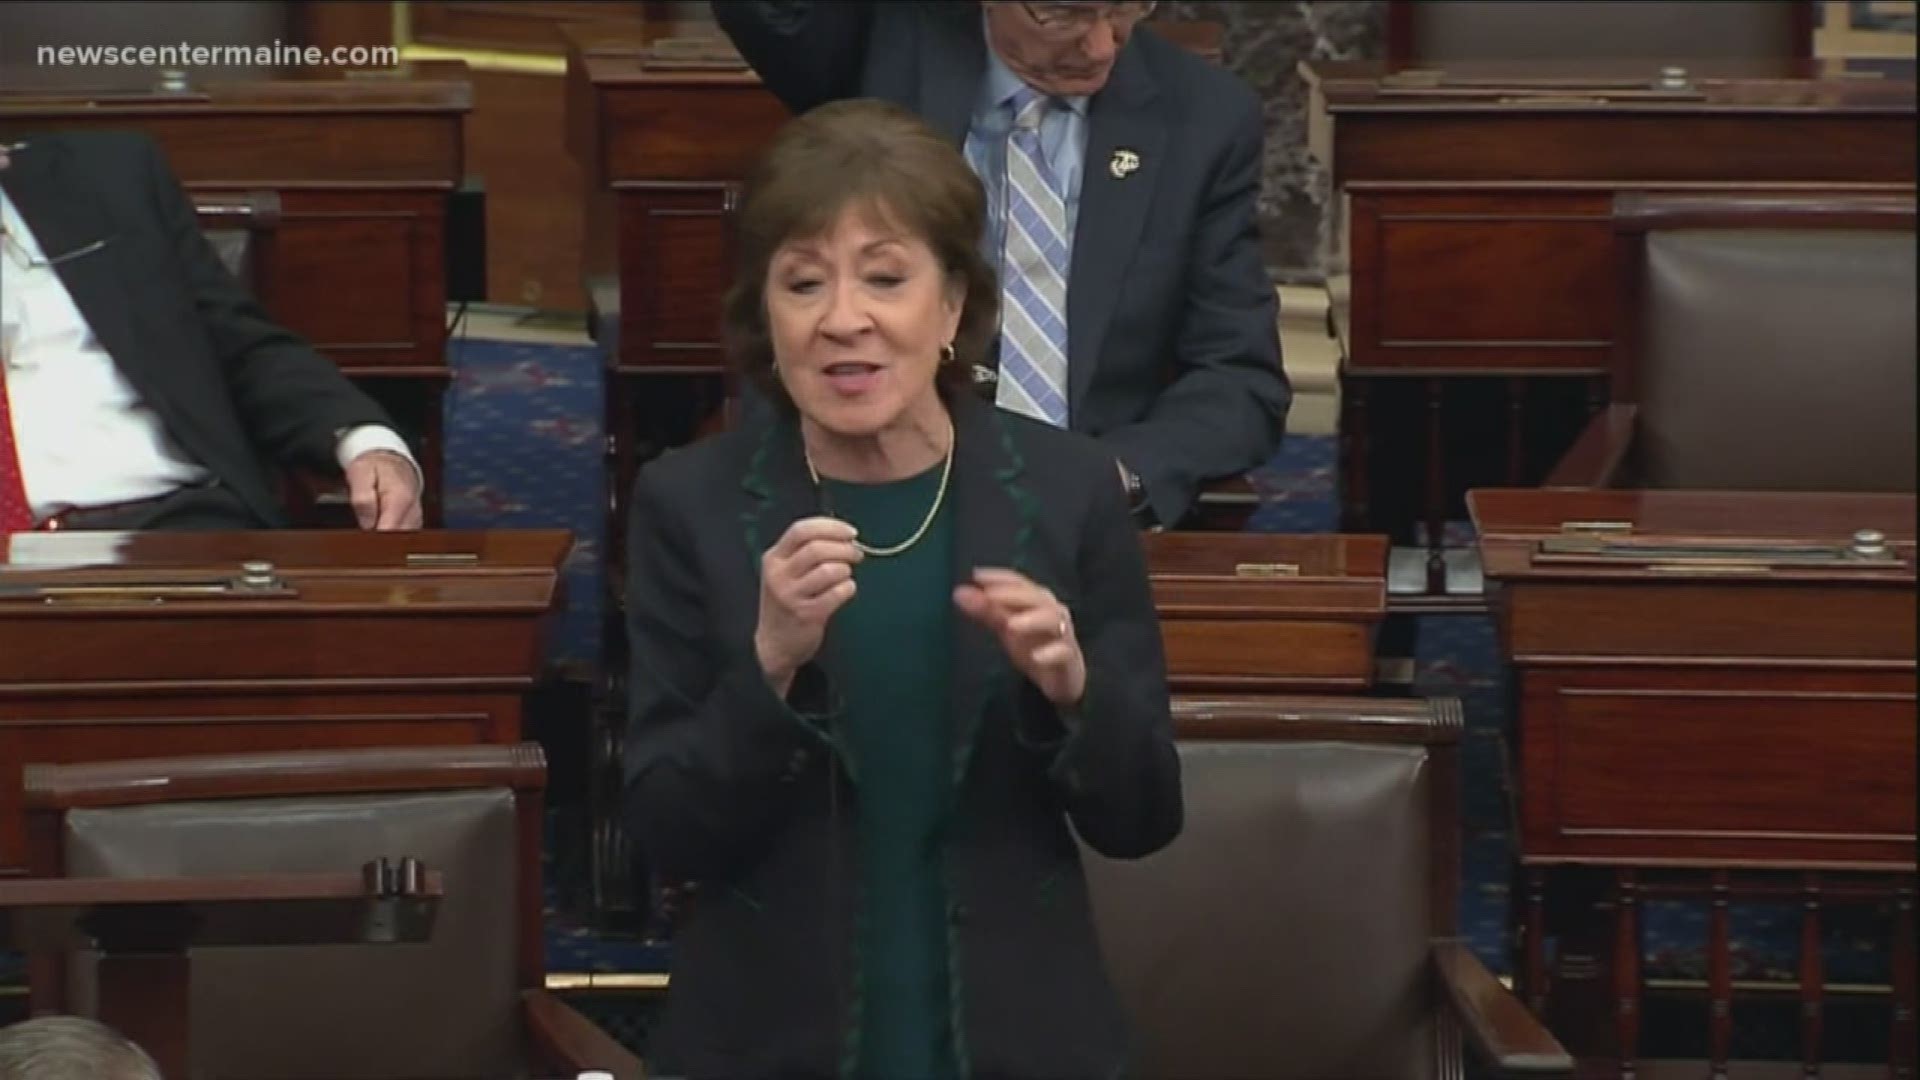 Sen. Collins speaks out against 'partisan delay tactics' she feels are blocking emergency coronavirus economic package